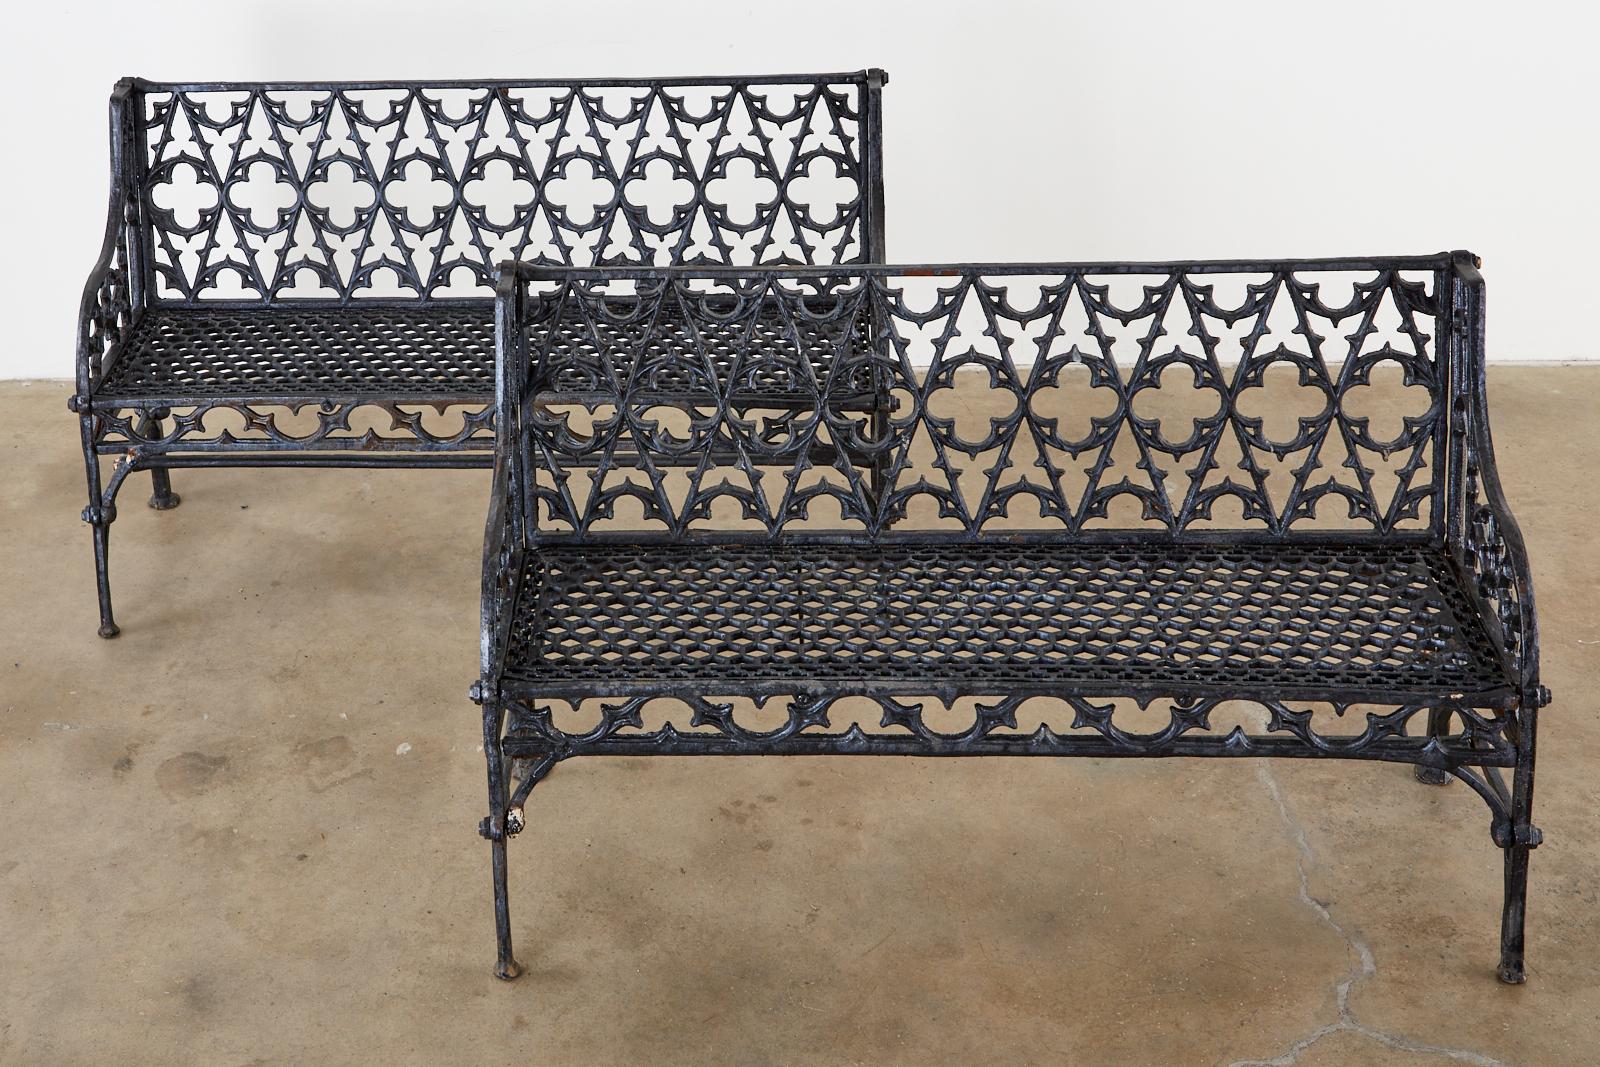 Cast English Coalbrookdale Attributed Iron Gothic Revival Garden Benches